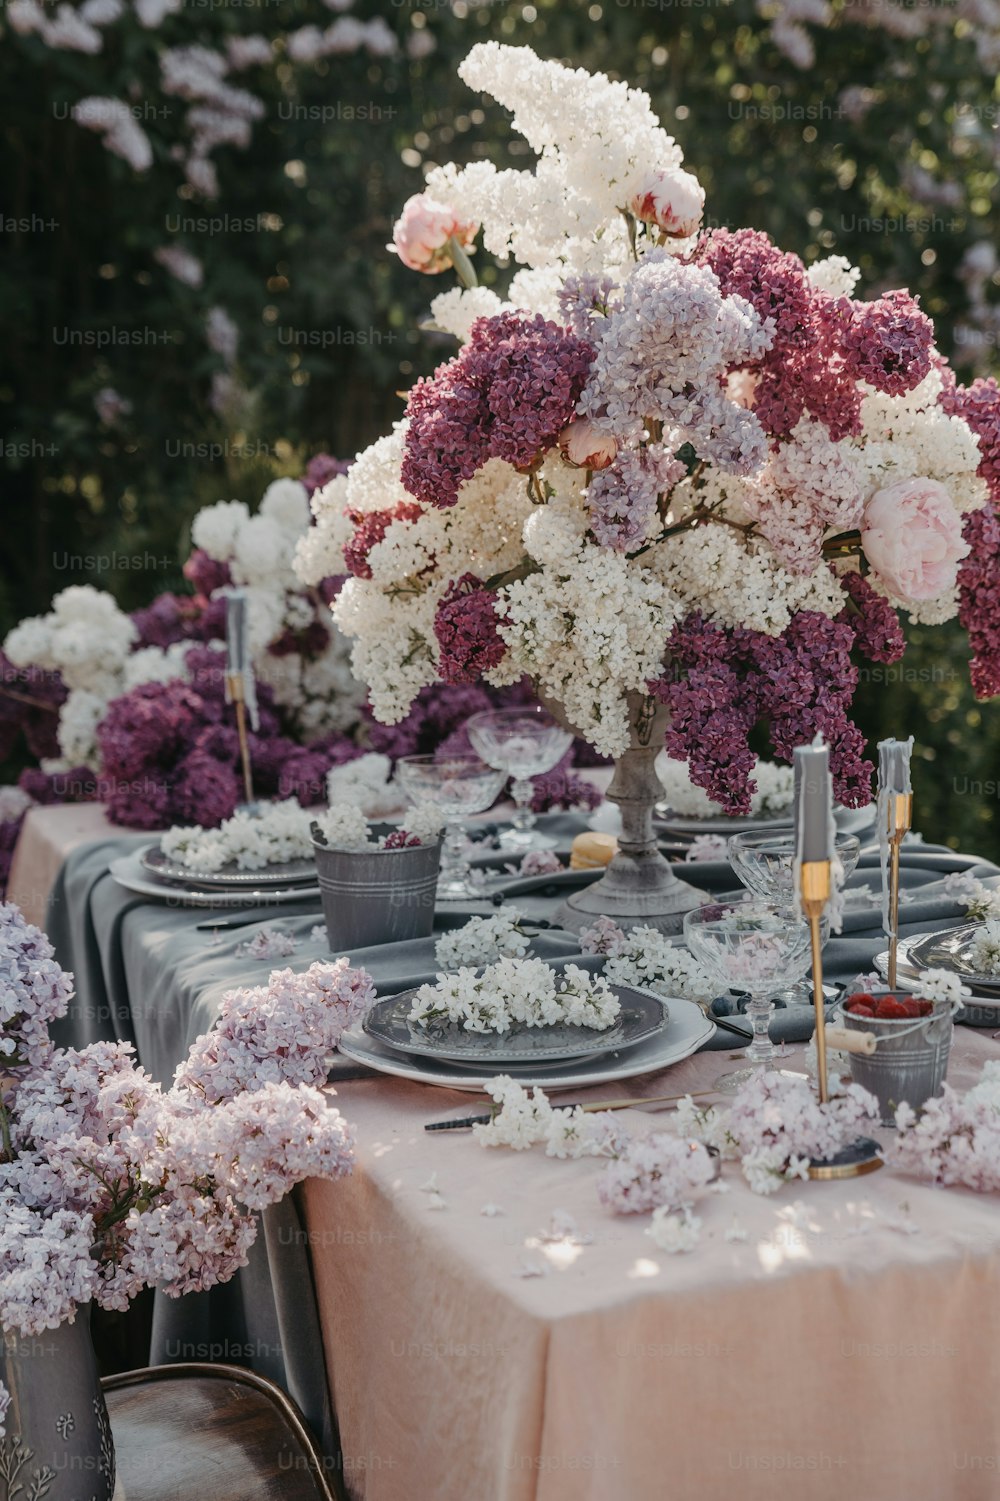 a table is set with plates and flowers